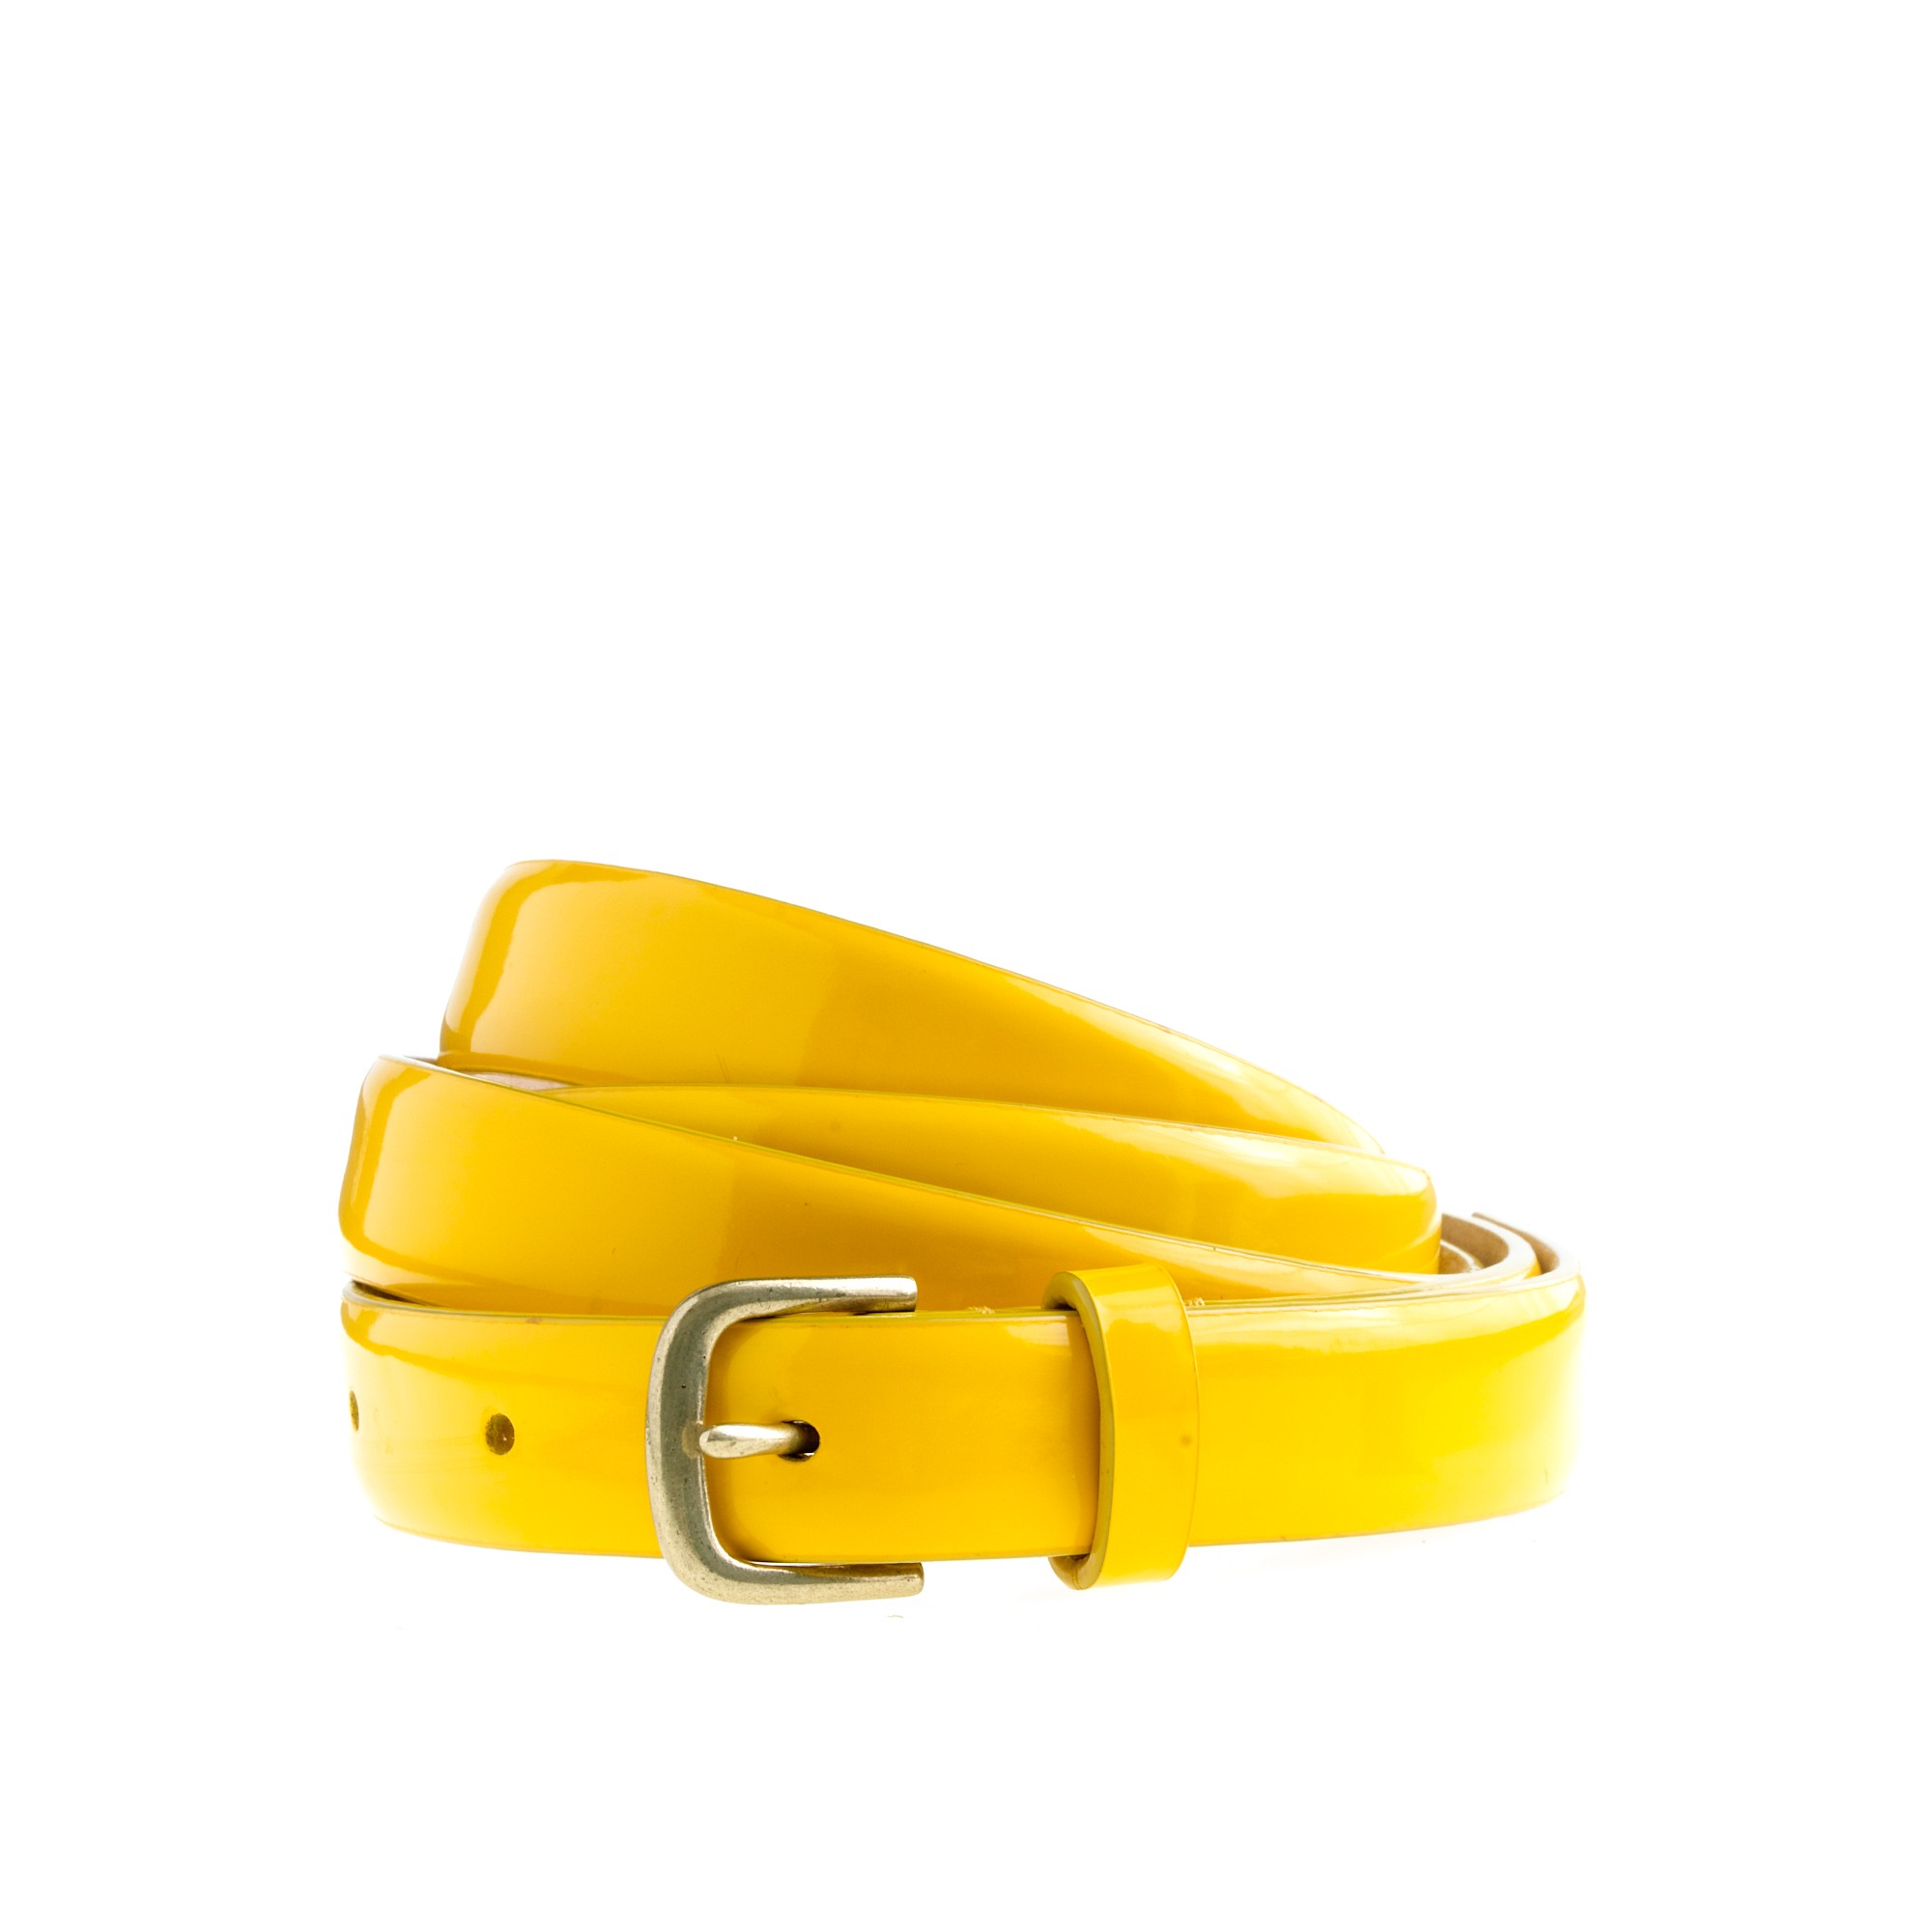 J.Crew Patent Leather Skinny Belt in Red